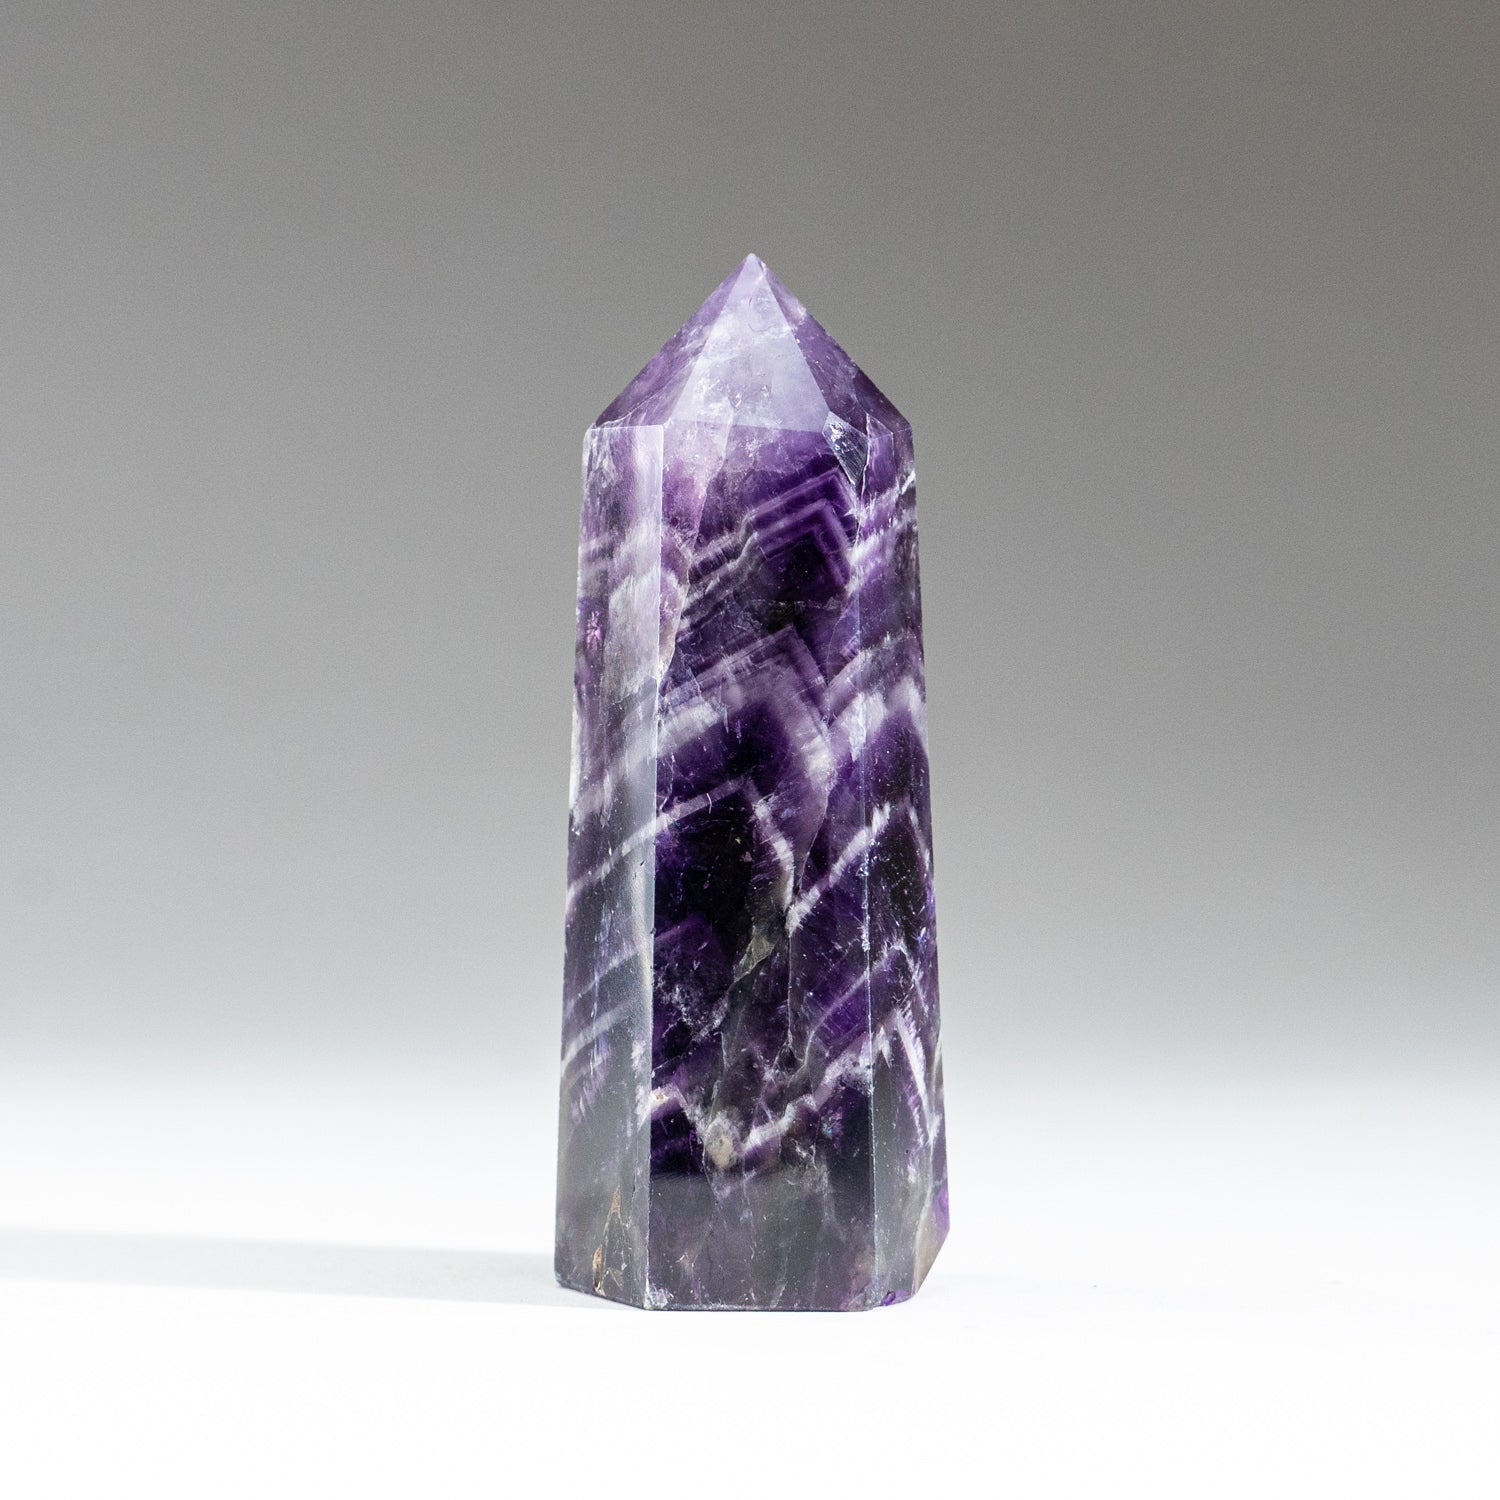 Polished Chevron Amethyst Point from Brazil (132.6 grams)